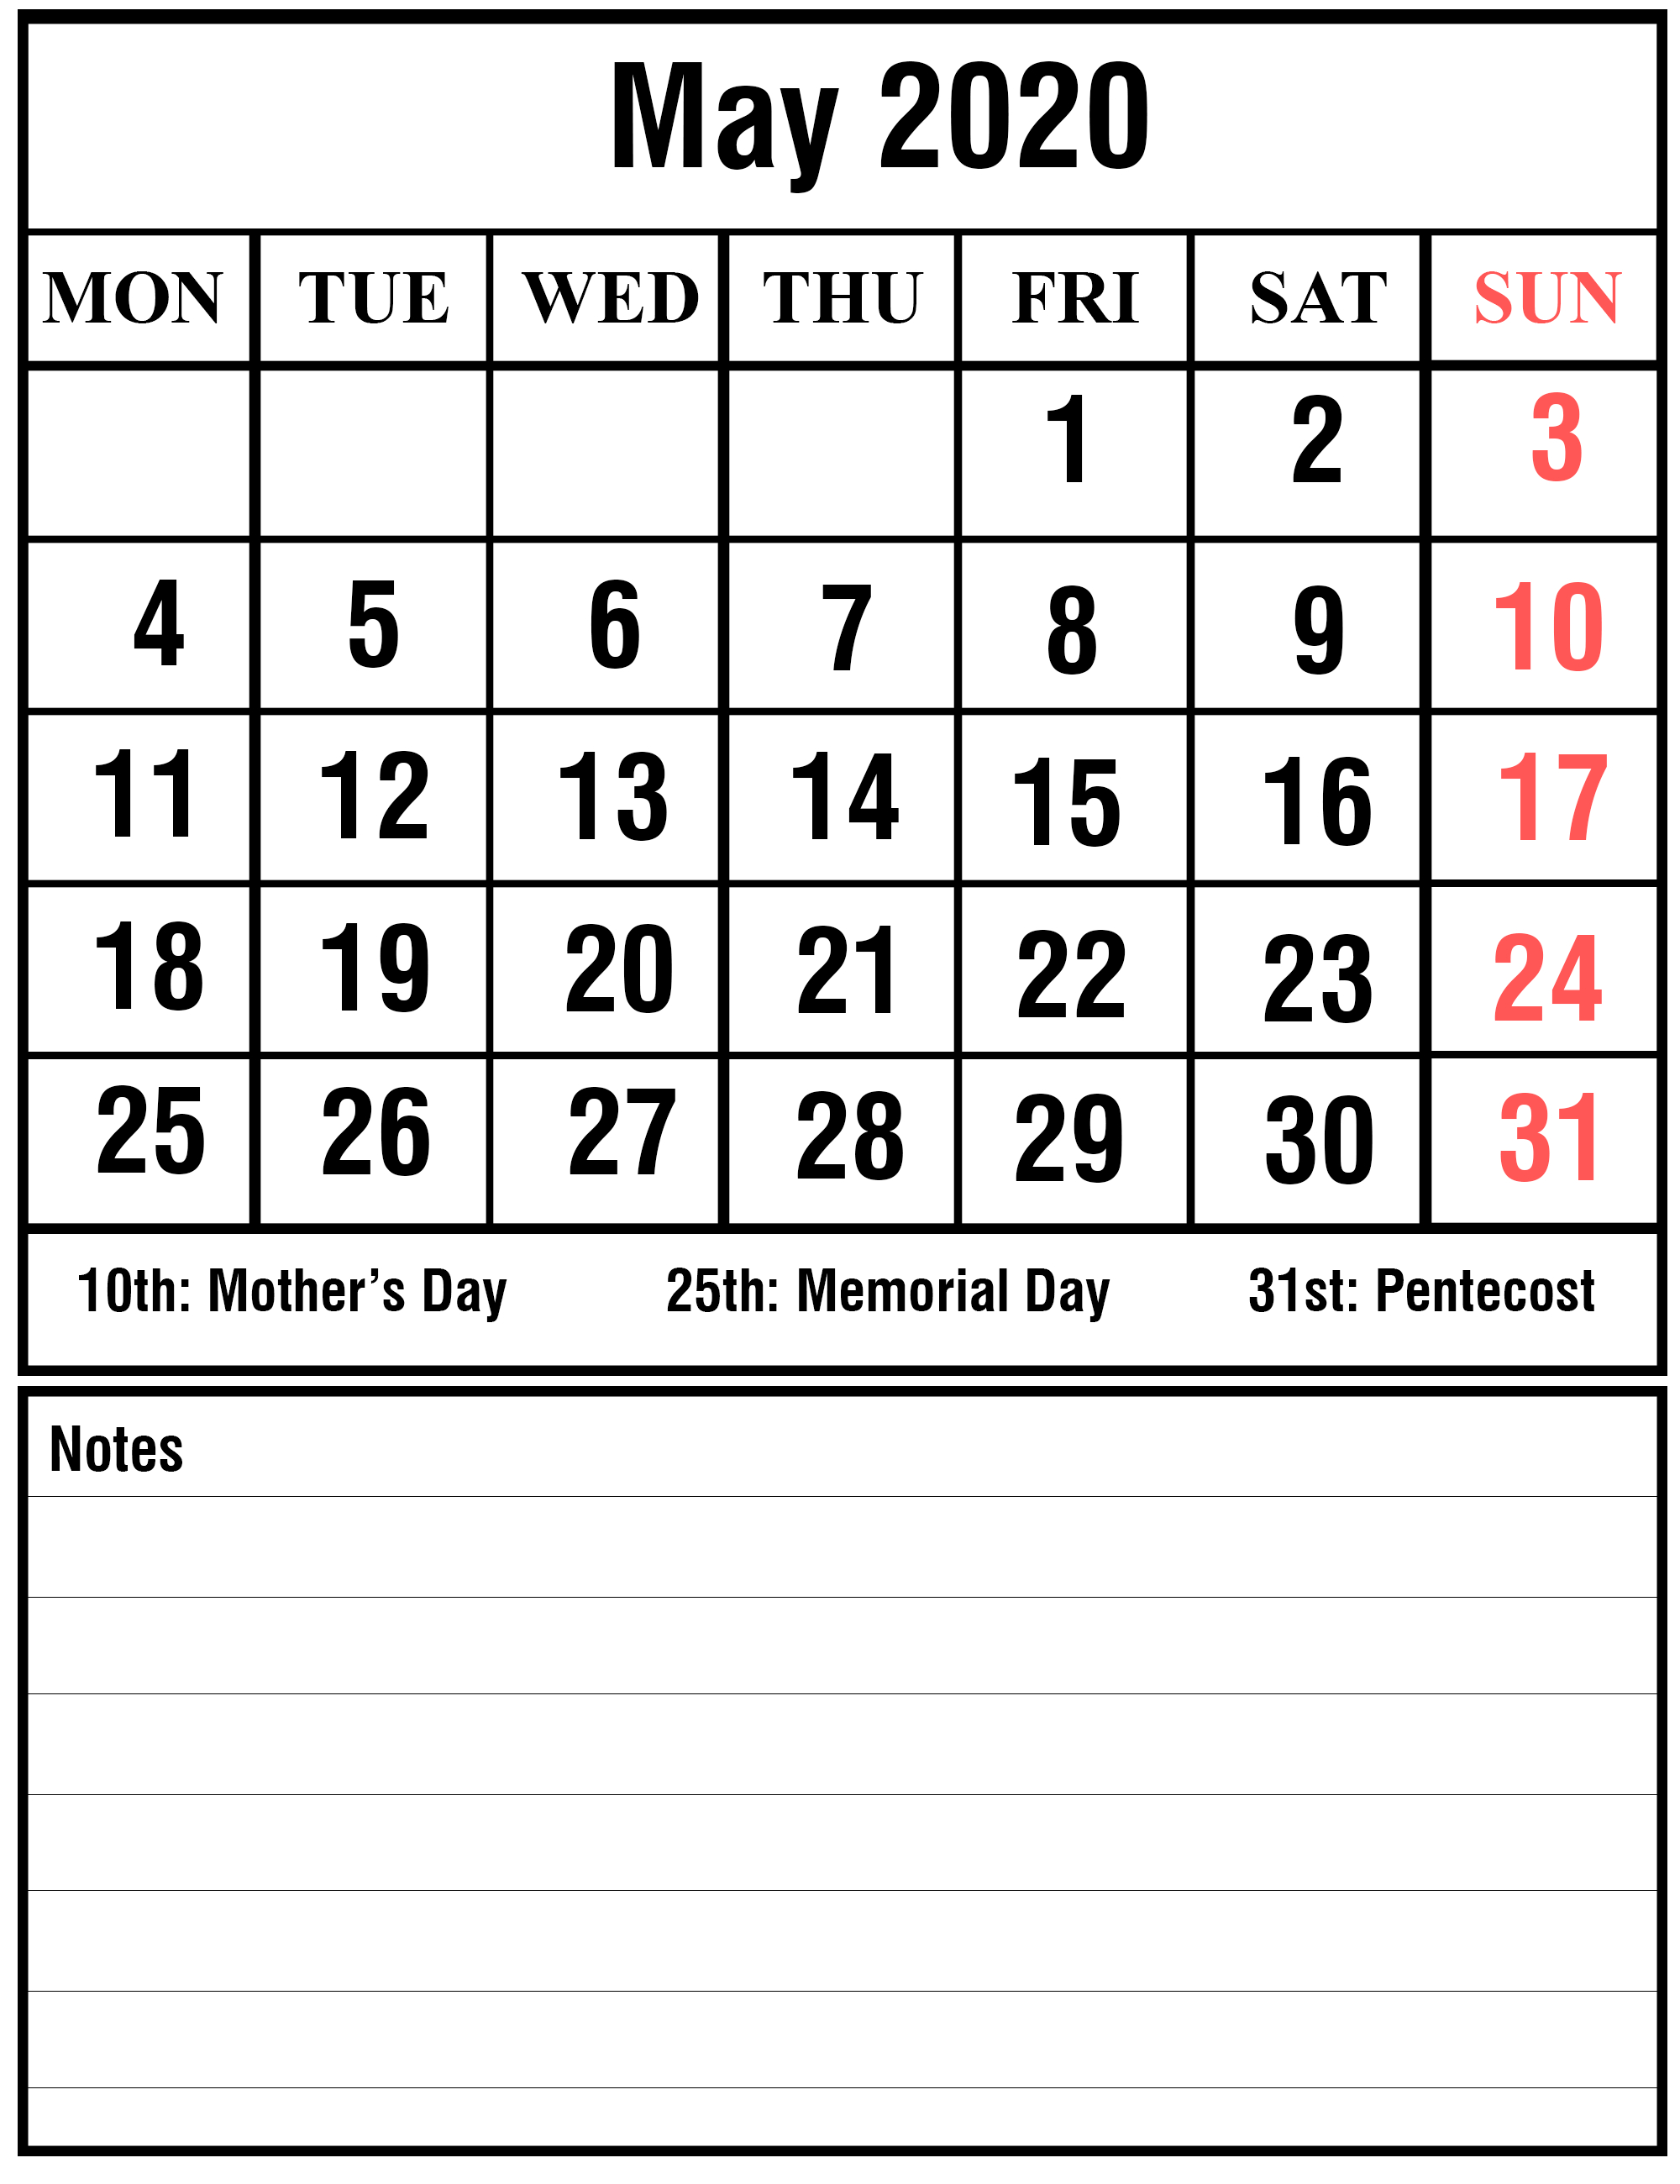 Free May 2020 Printable Calendar Template With Holidays [Pdf